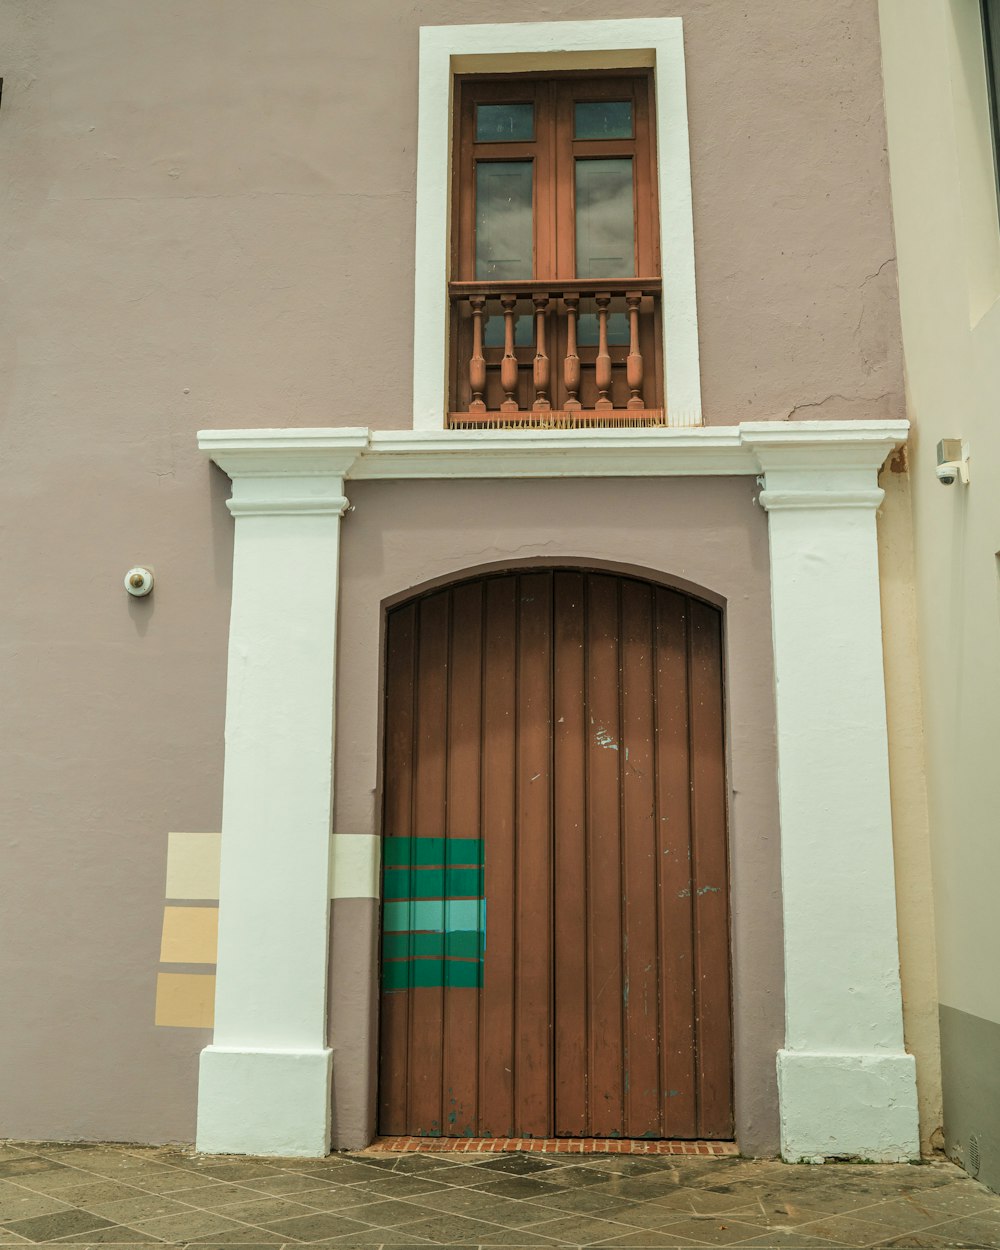 a brown and white building with a wooden door